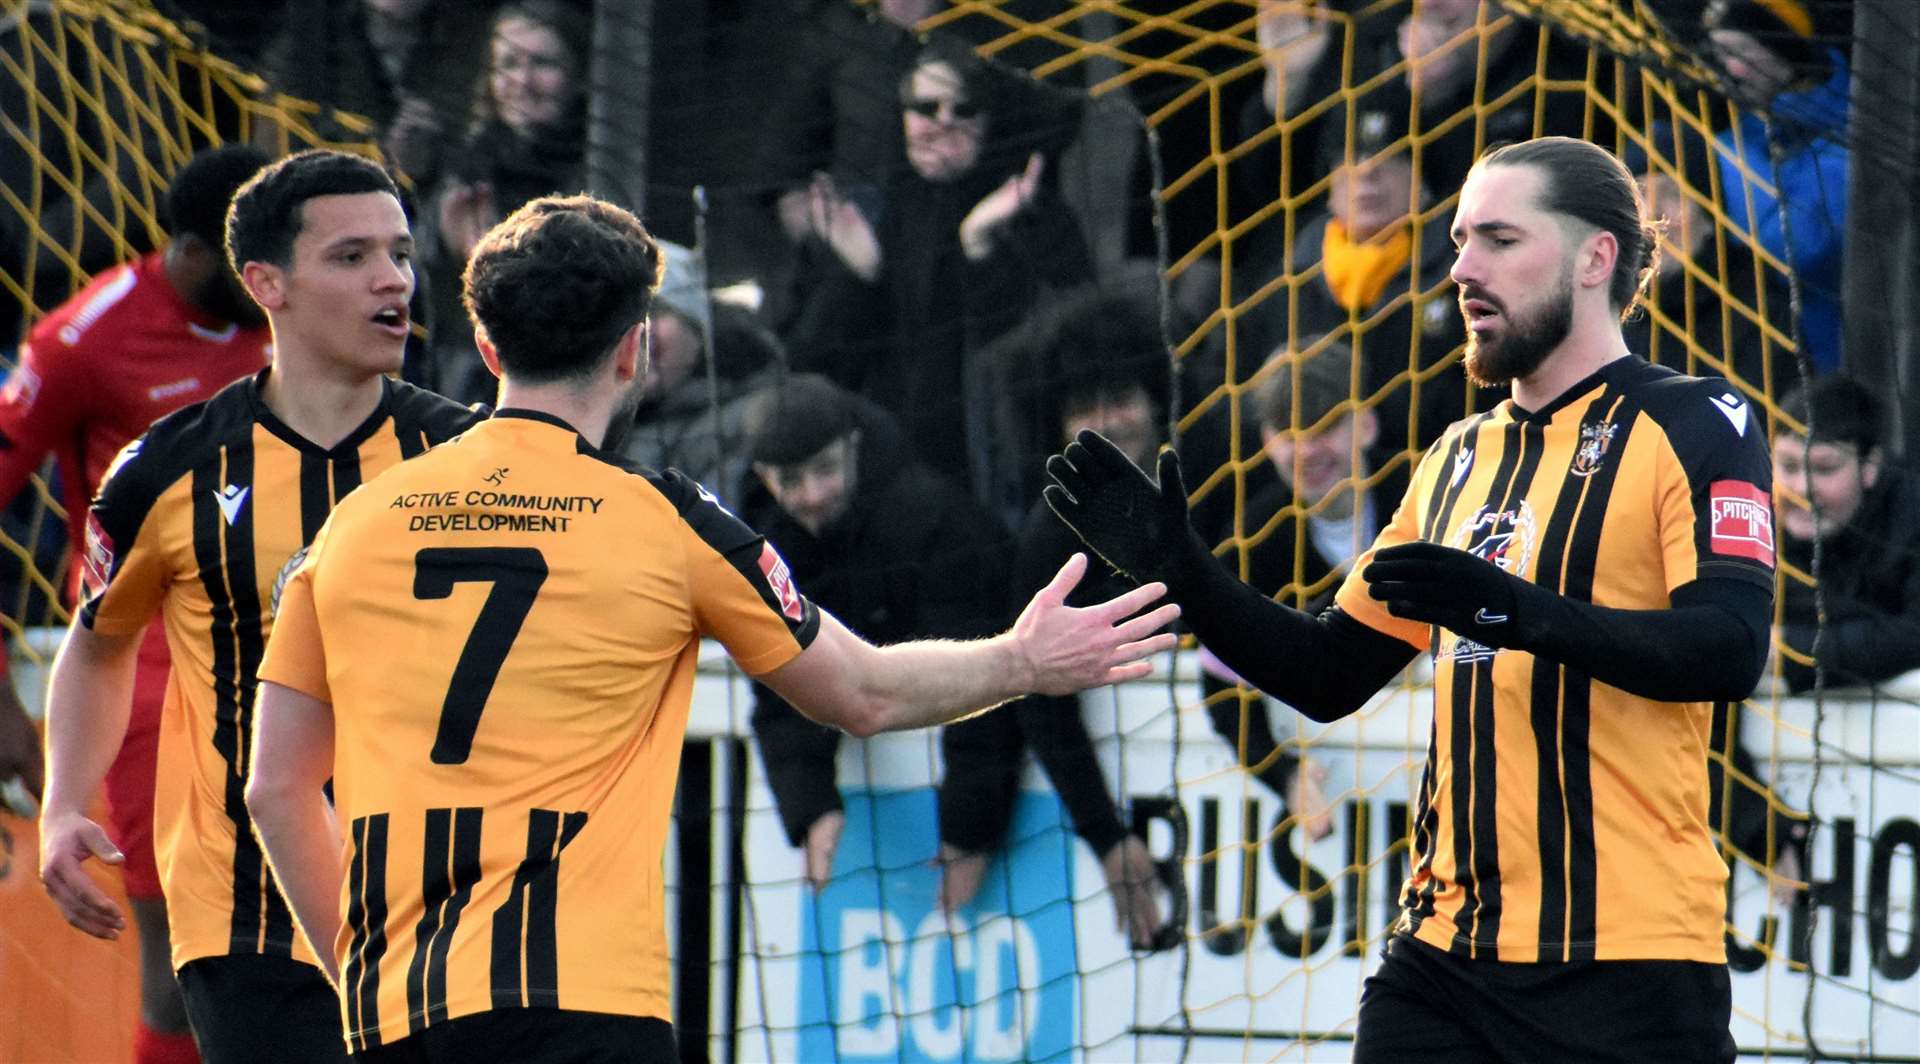 Striker Tom Derry, right, scored twice for Folkestone against Carshalton in their weekend 3-3 draw. Picture: Randolph File